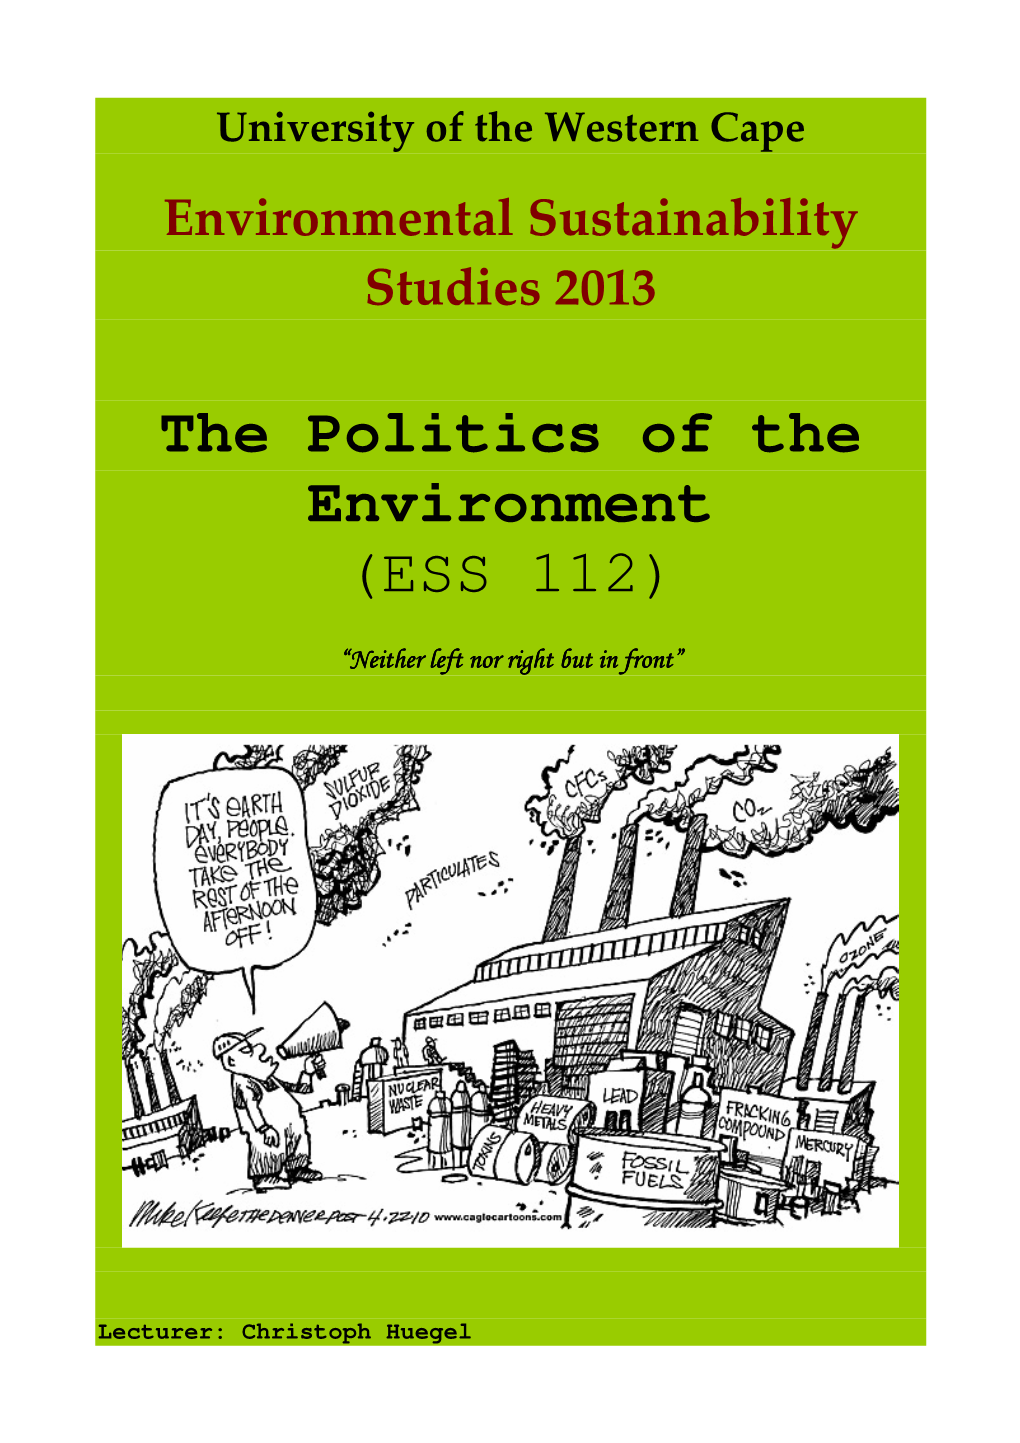 The Politics of the Environment (ESS 112)